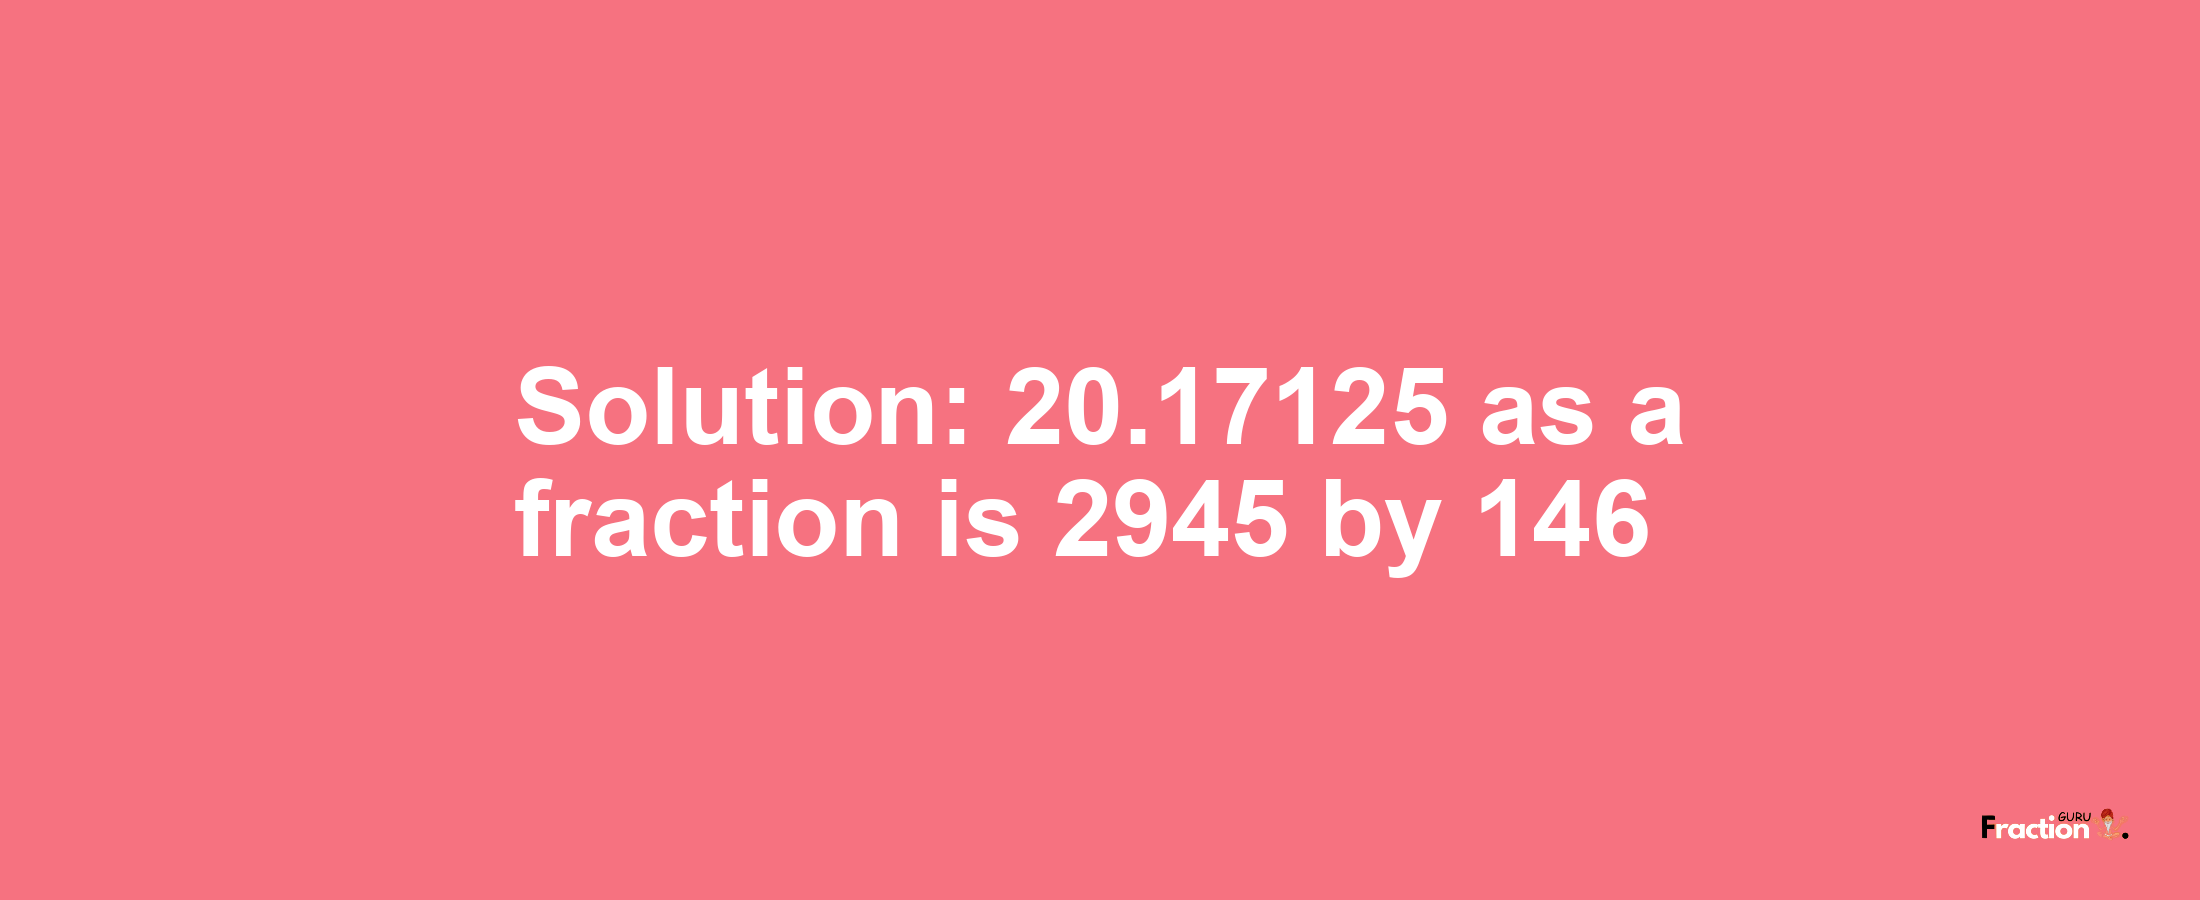 Solution:20.17125 as a fraction is 2945/146